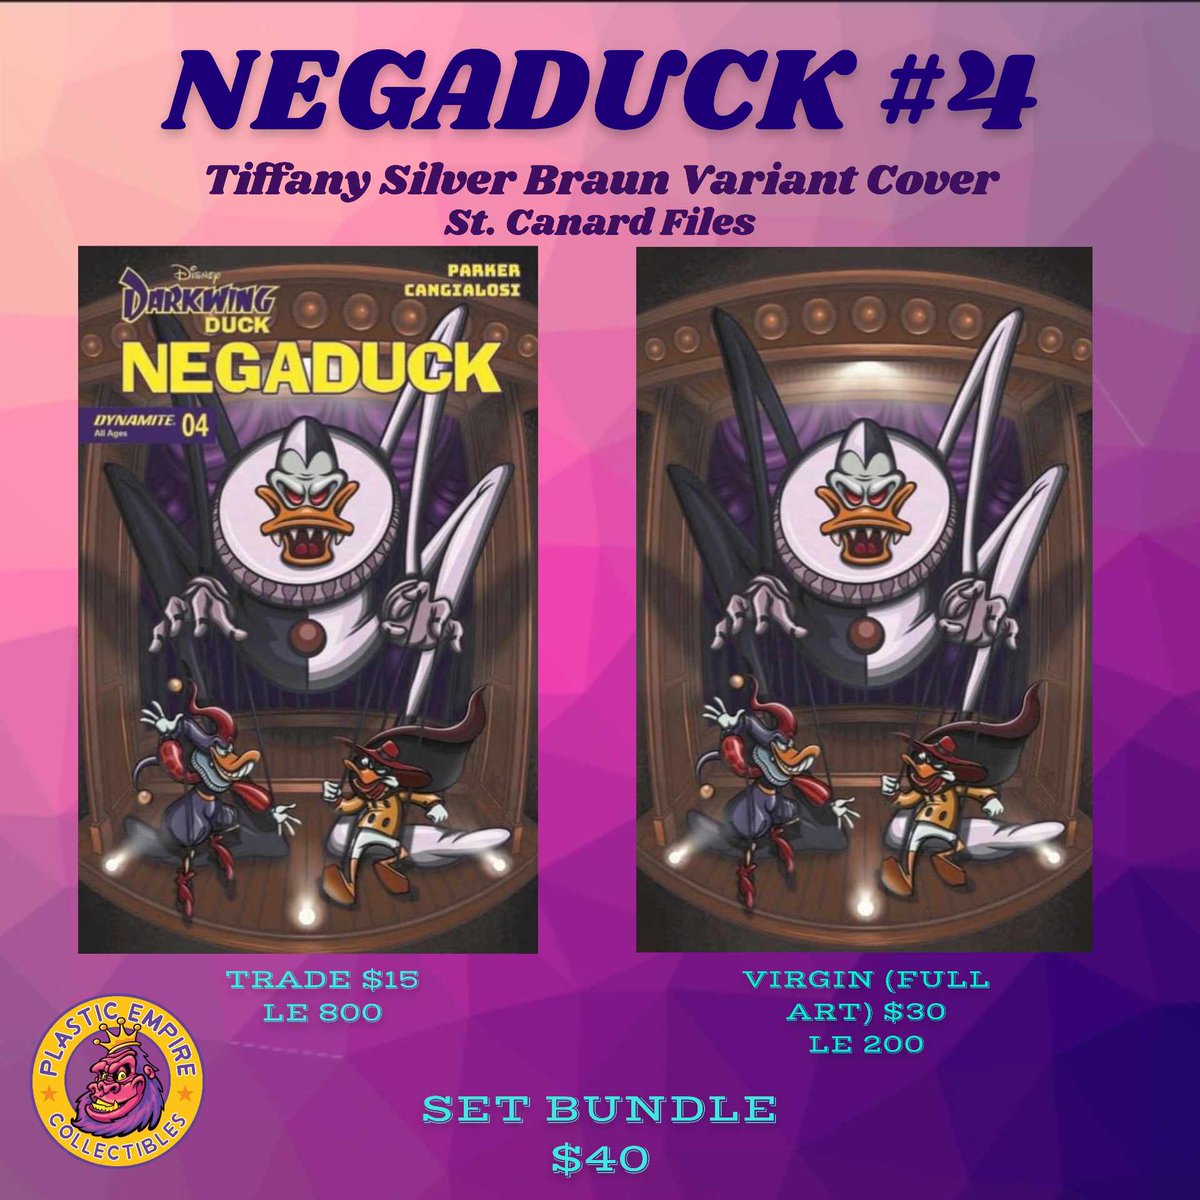 The St. Canard Files/Tiffany Silver Braun Exclusive Negaduck #4 Cover is now live at Plastic Empire
Trade
plasticempire.com/products/negad…
Virgin
plasticempire.com/products/copy-…
Bundle
plasticempire.com/products/copy-…